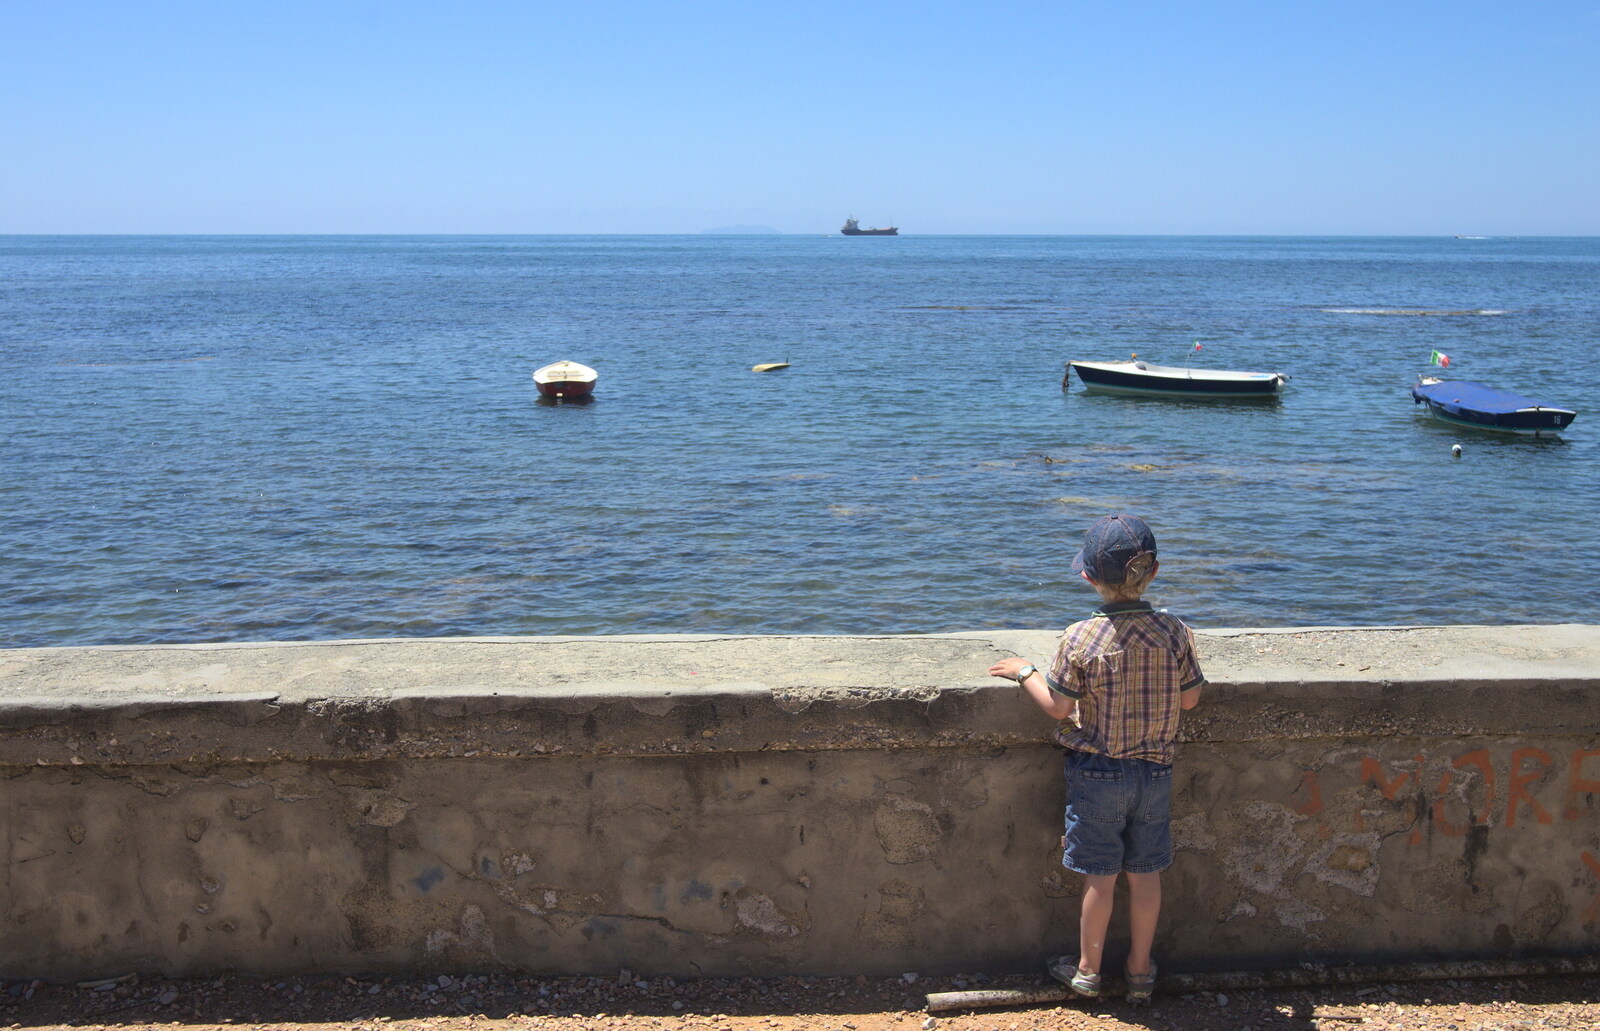 Fred looks out to sea from La Verna Monastery and the Fireflies of Tuscany, Italy - 14th June 2013